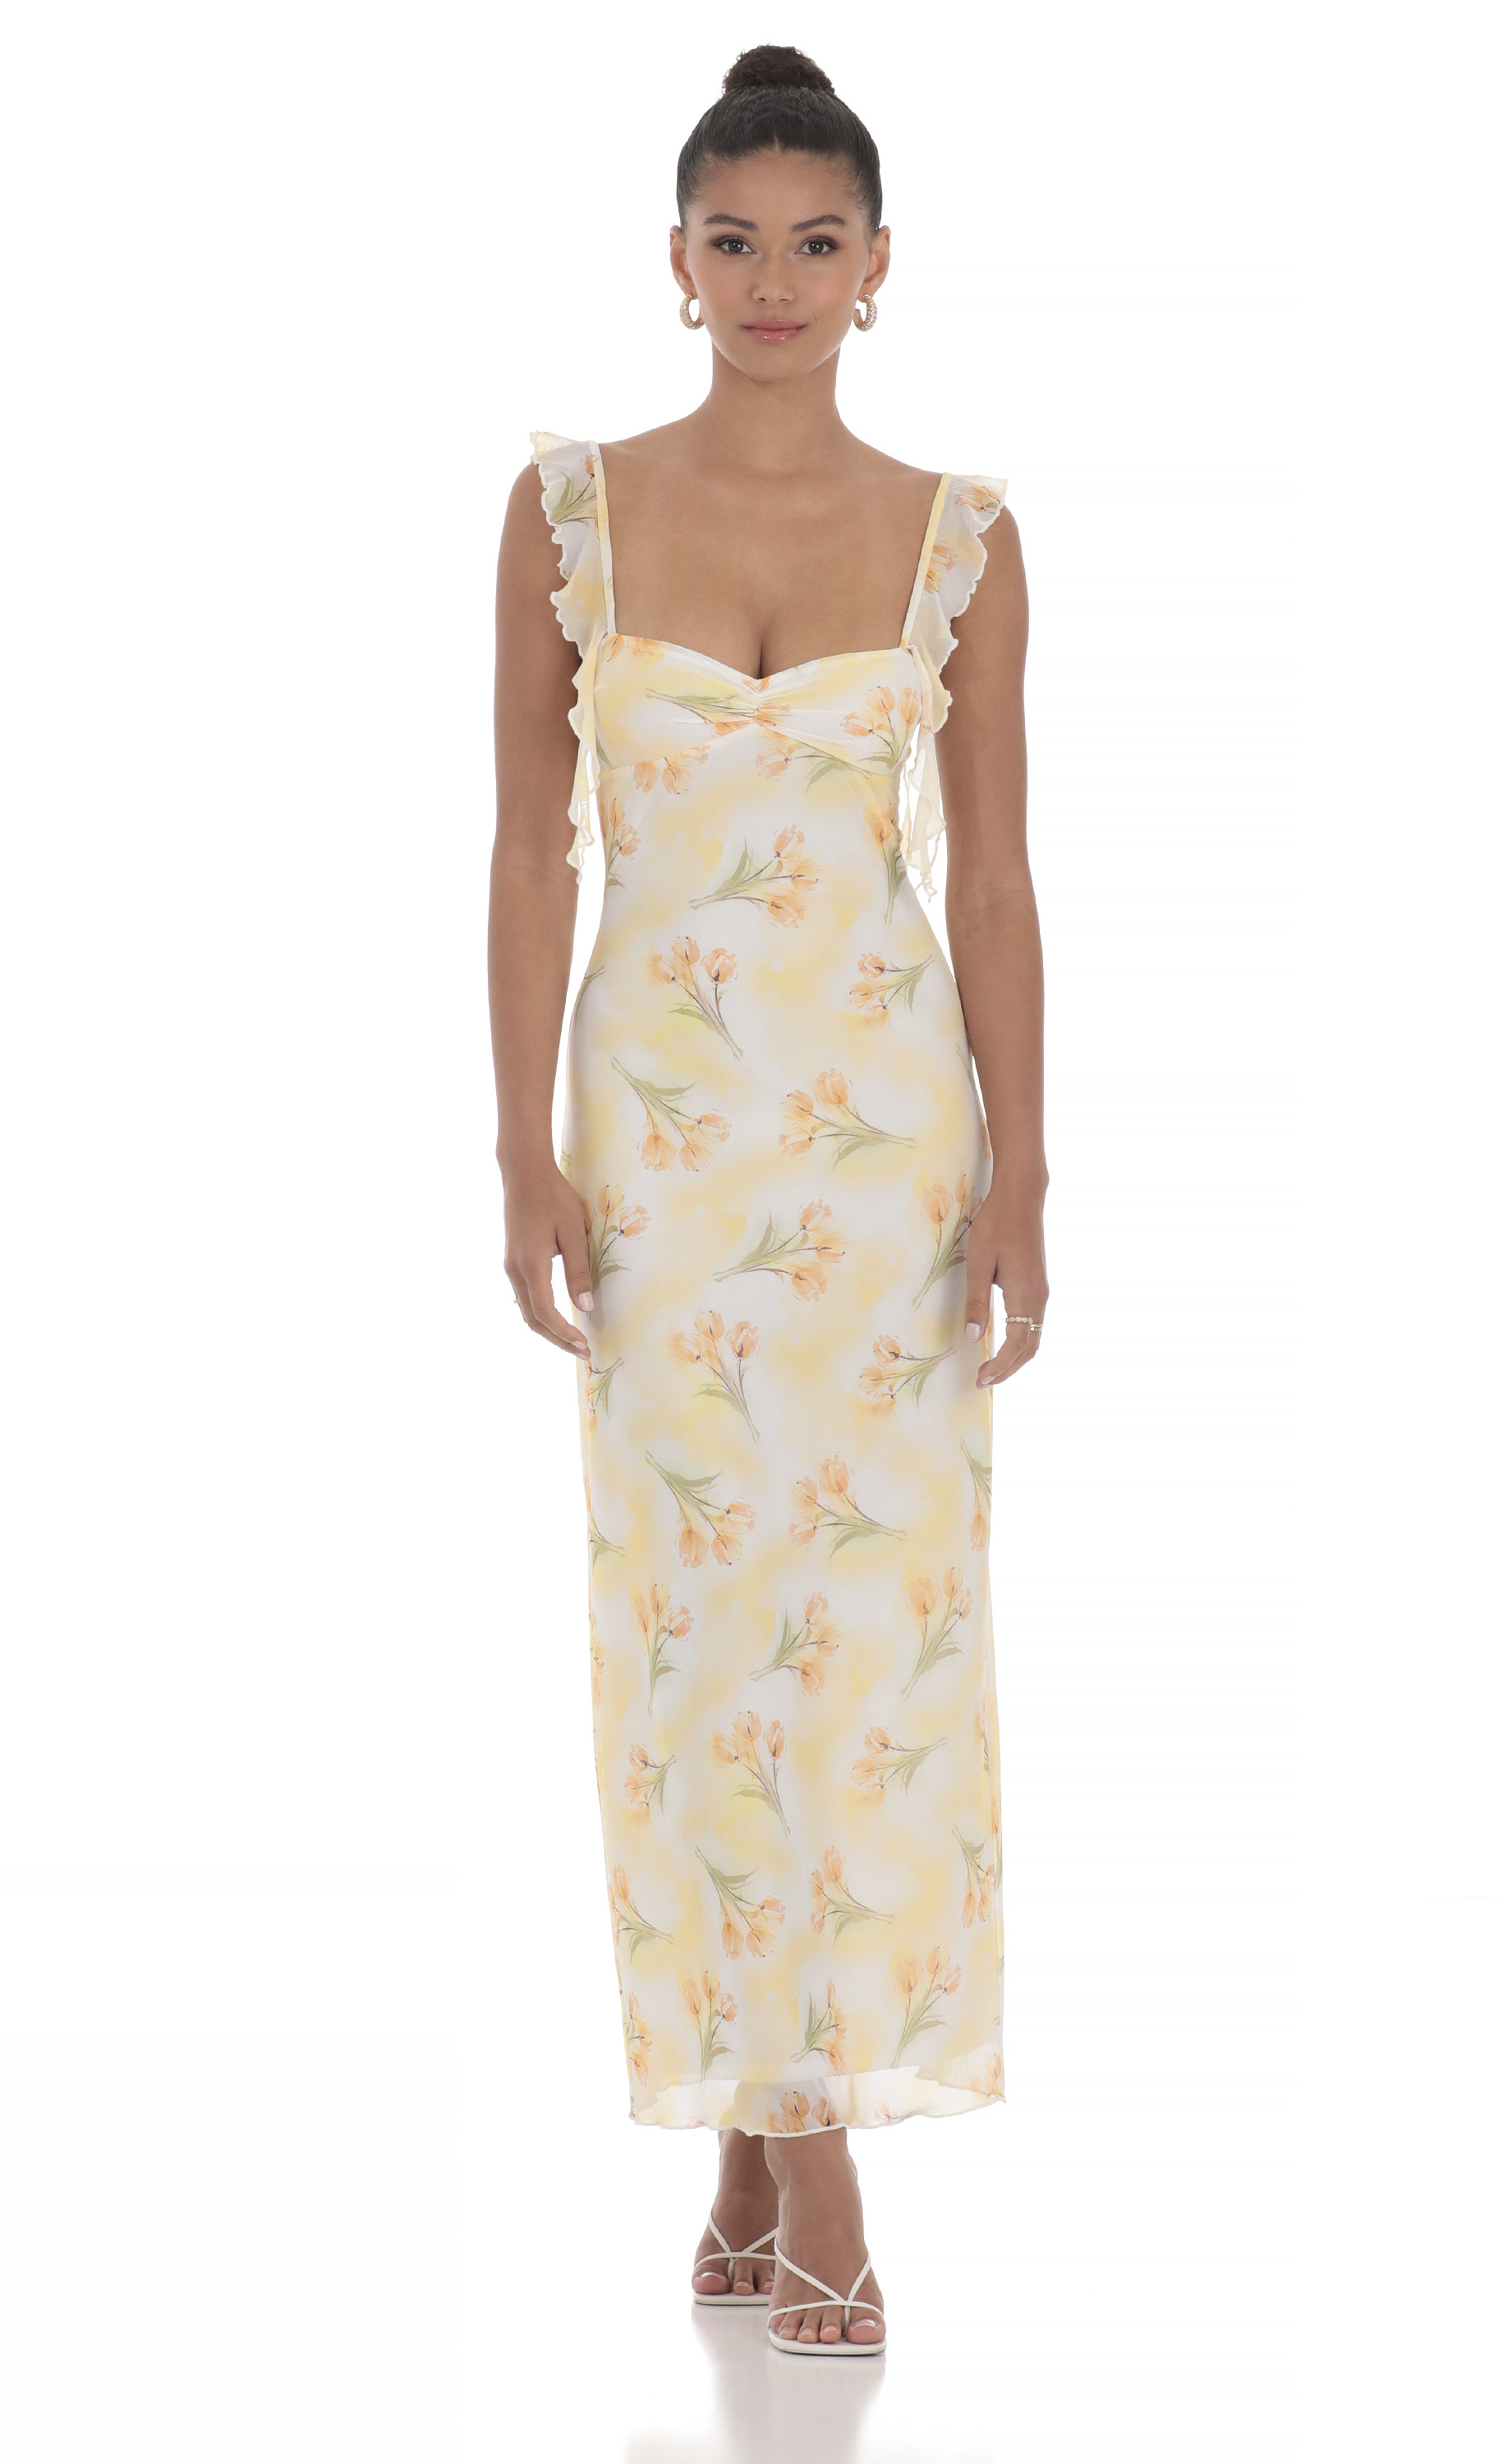 Floral Tassel Strap Maxi Dress in Yellow and White